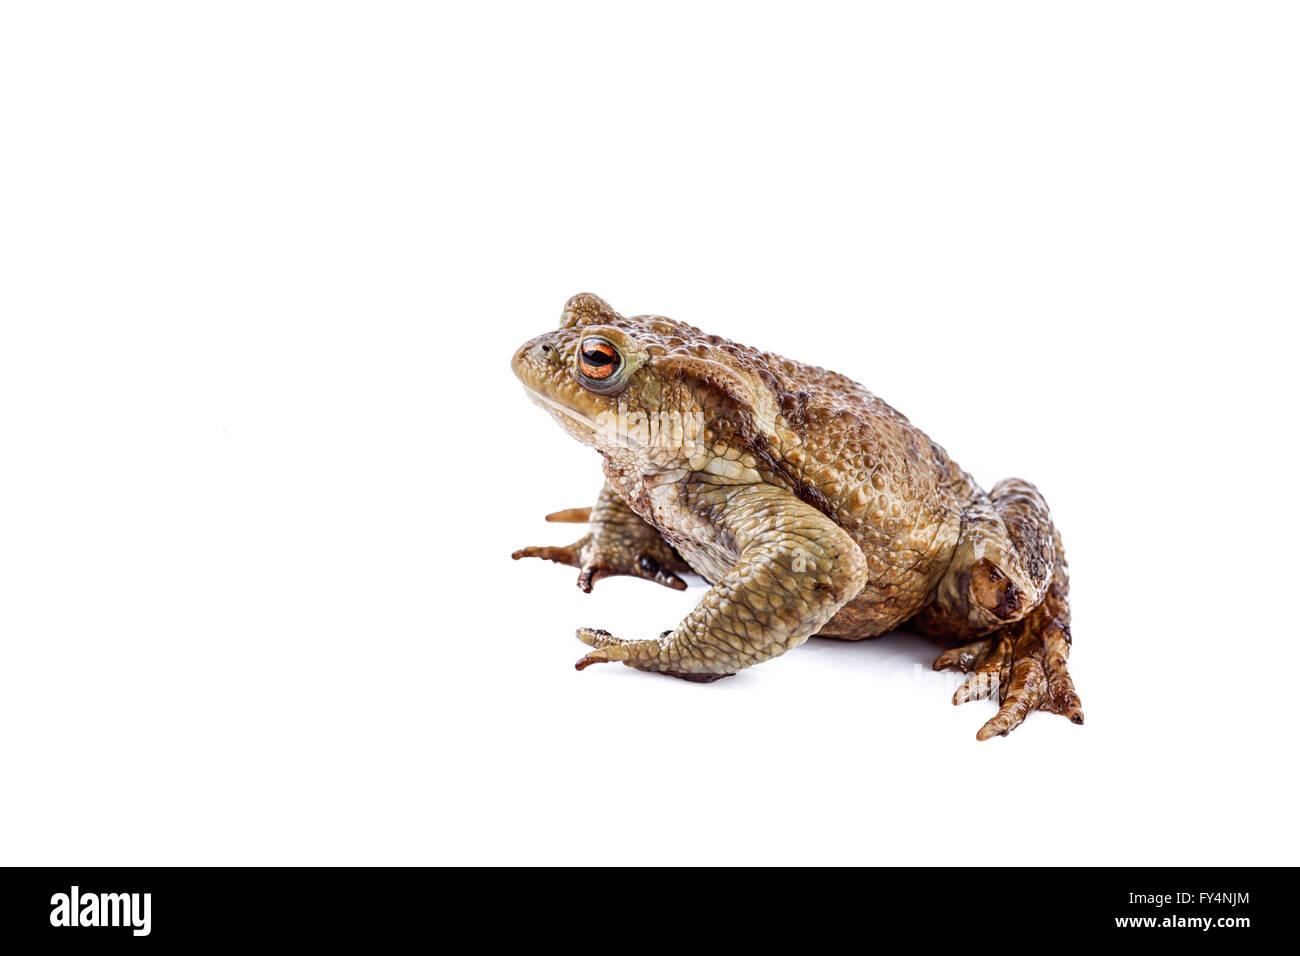 Frog or Common toad (Bufo bufo) Stock Photo